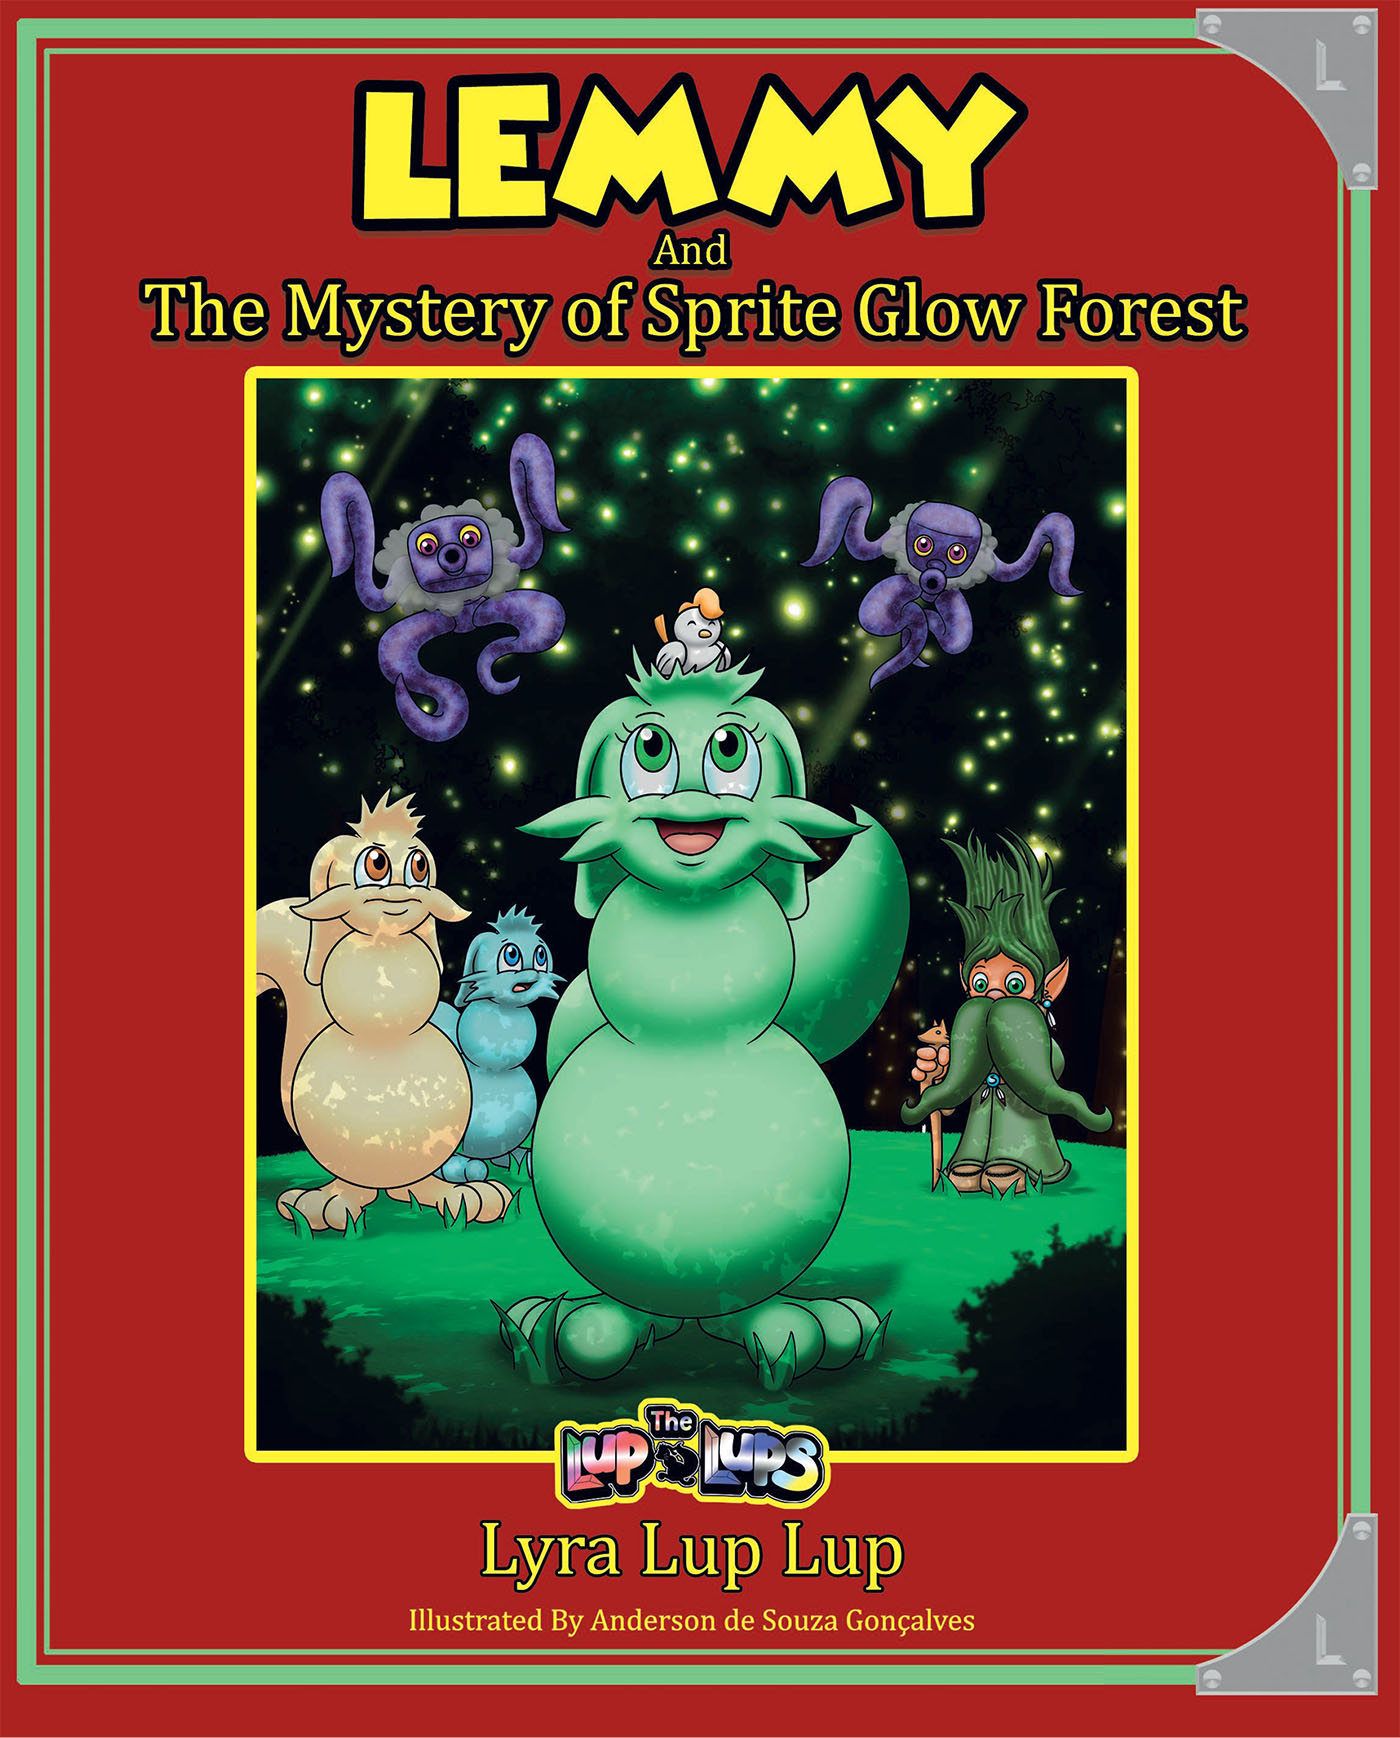 Author Lyra Lup Lup’s New Book, "Lemmy and the Mystery of Sprite Glow Forest," is an Engaging Tale of Two Friends Who Set Off to Explore a Dangerous and Mystical Forest